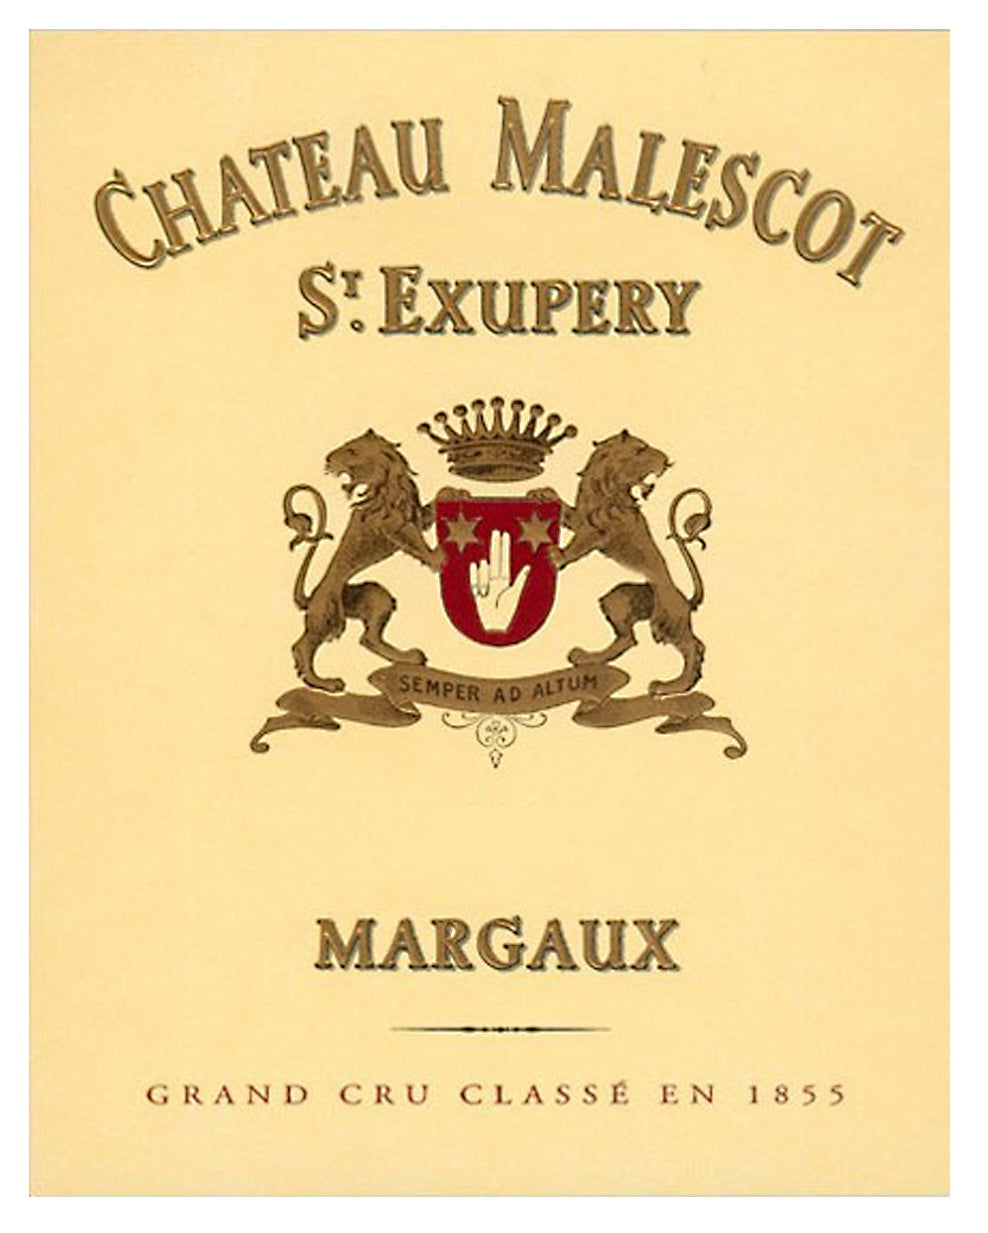 Chateau Malescot St-Exupery 馬利哥